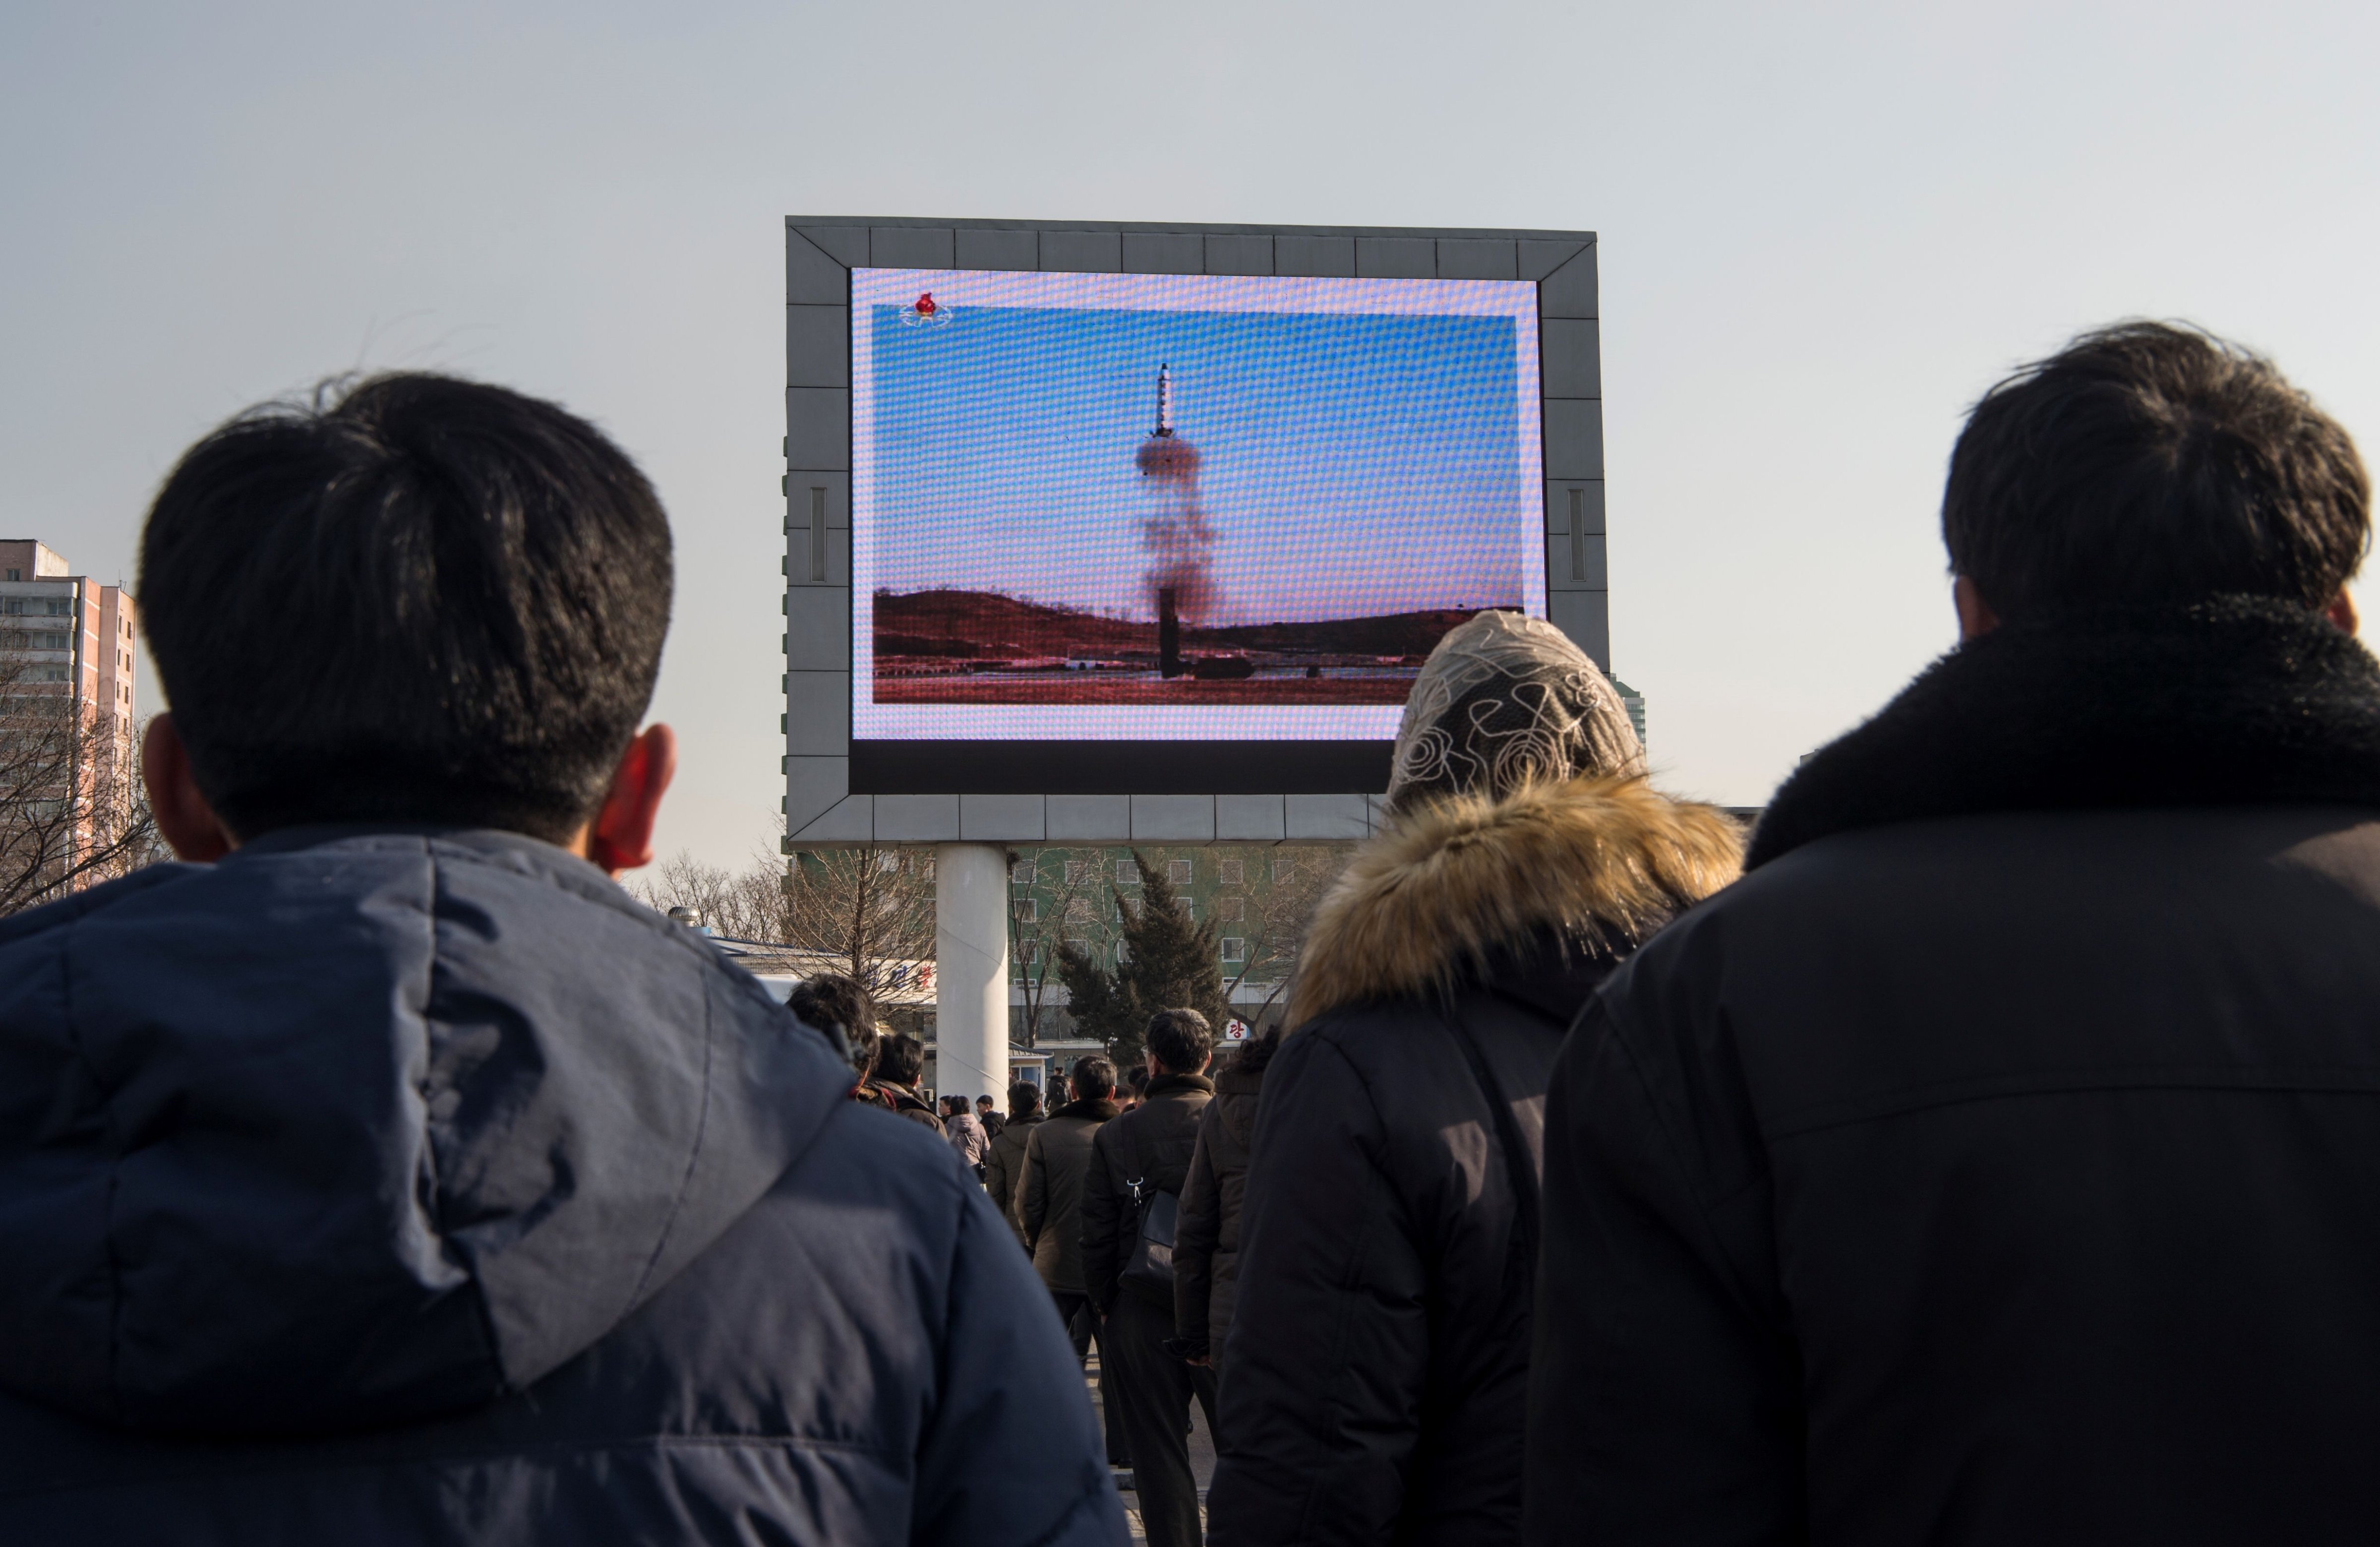 This photo taken on Feb. 13, 2017 shows people in Pyongyang watching a public broadcast about the launch of a medium long-range ballistic missile. (Kim Won-Jin—AFP/Getty Images)